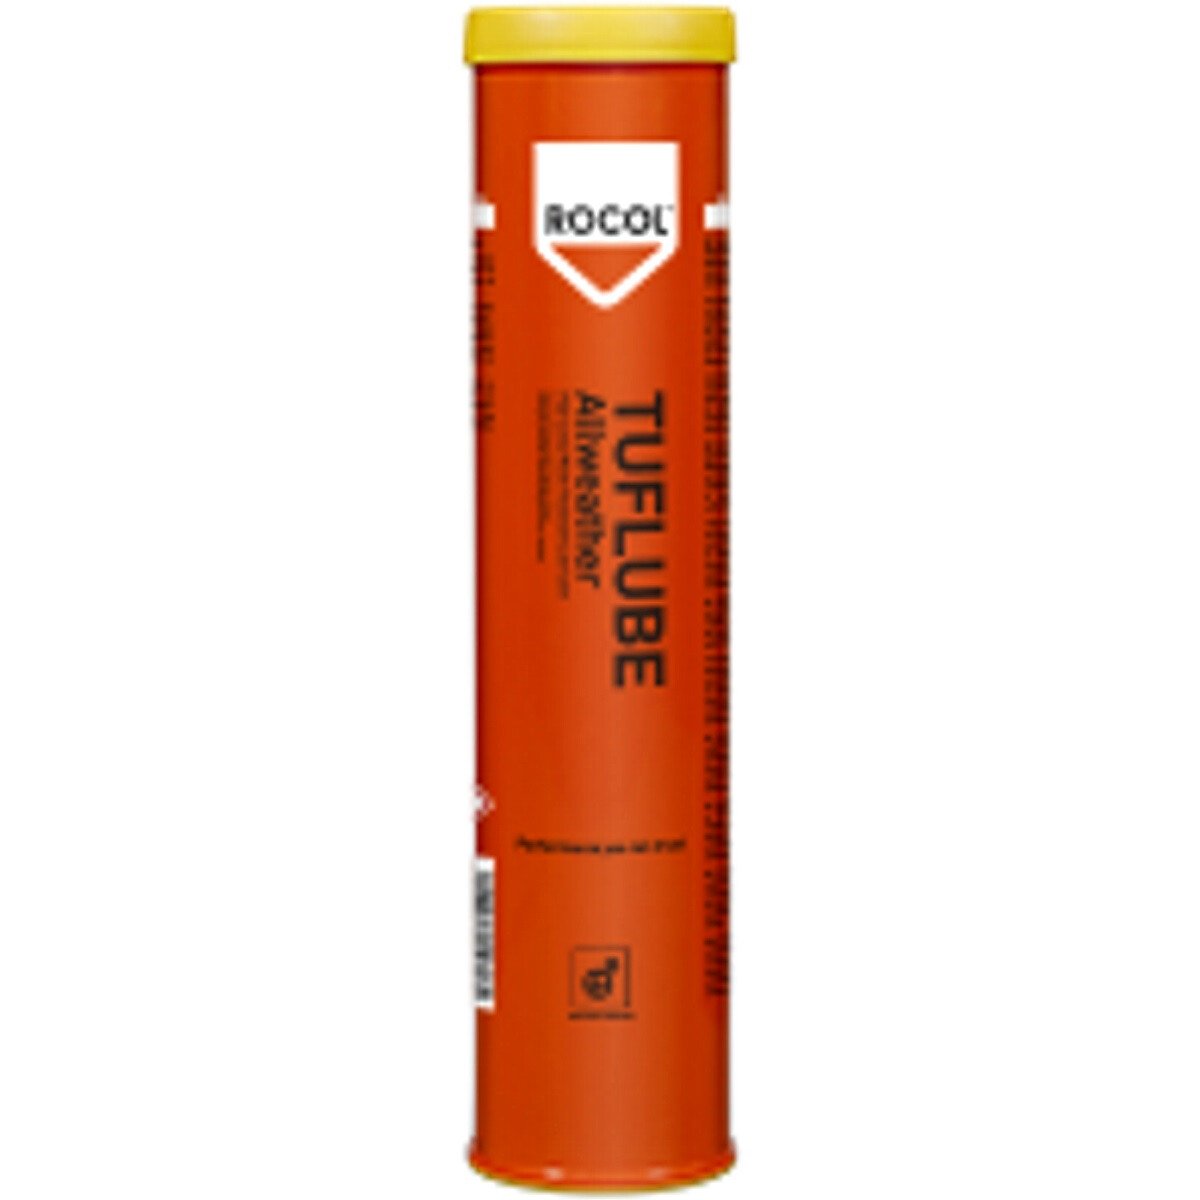 Rocol 18271 Tuflube Allweather Heavy Duty Jacking and Open Gear Grease 400g (Carton of 12)